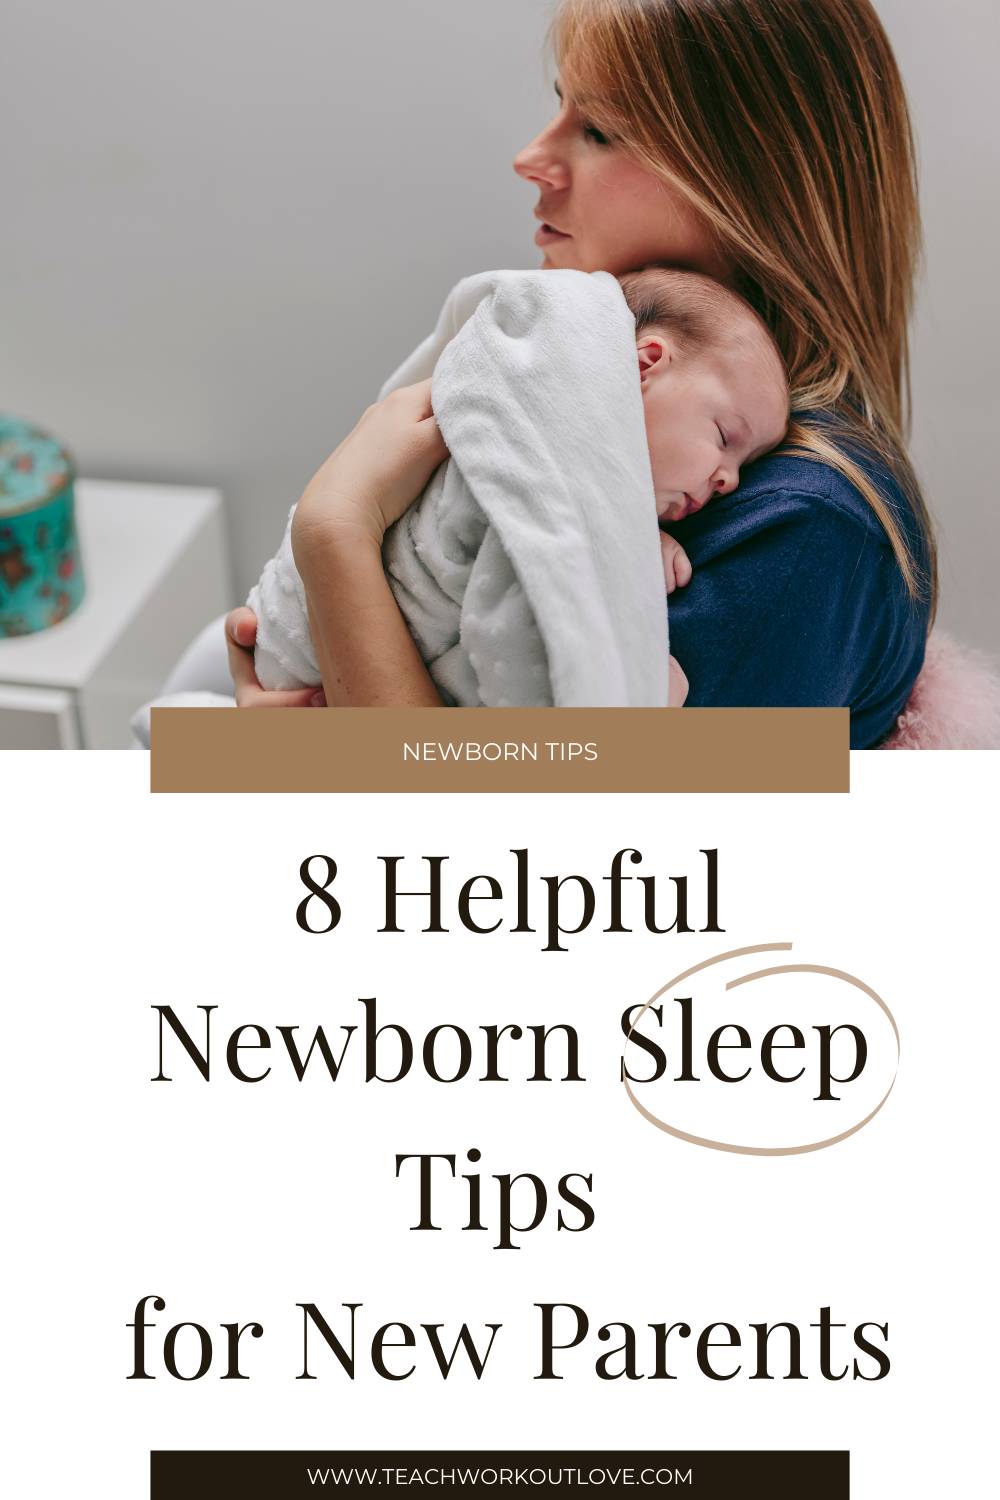 Here we have mentioned newborn sleep tips for new parents, these helps them to catch up on some much needed zzz's! Check it out now.